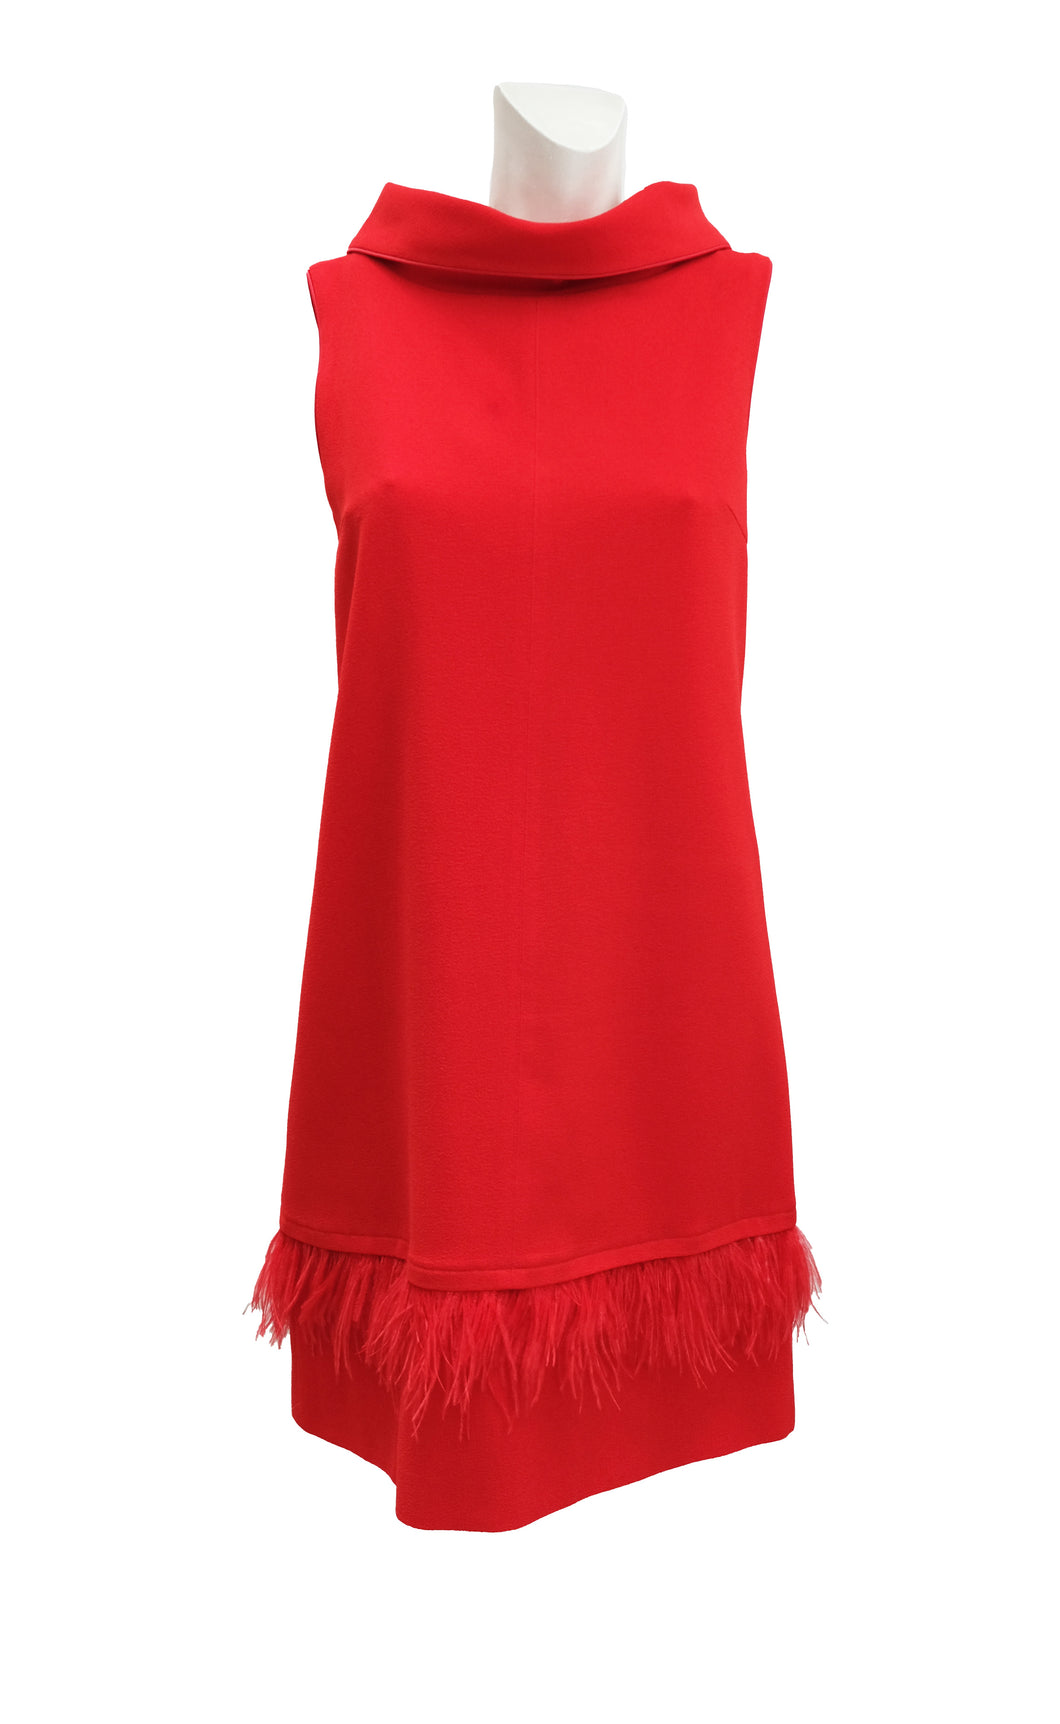 Musani Couture Shift Dress in Red with Feather Trim, UK10-12